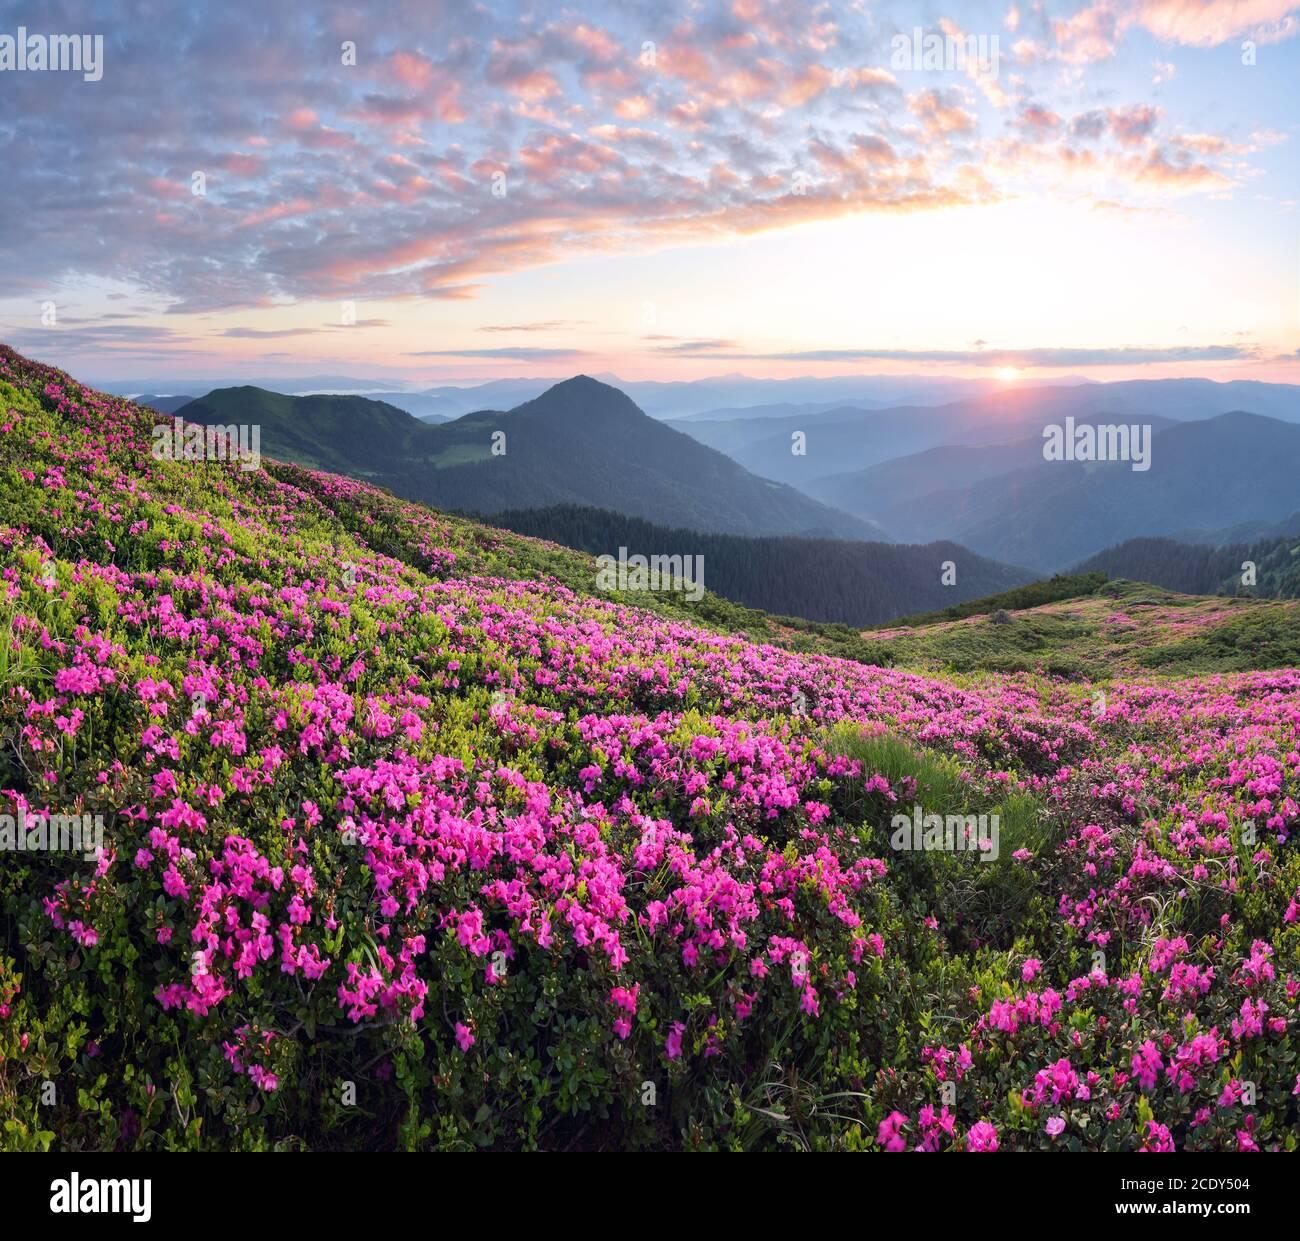 Scenery Of The Sunset At High Mountains Amazing Spring